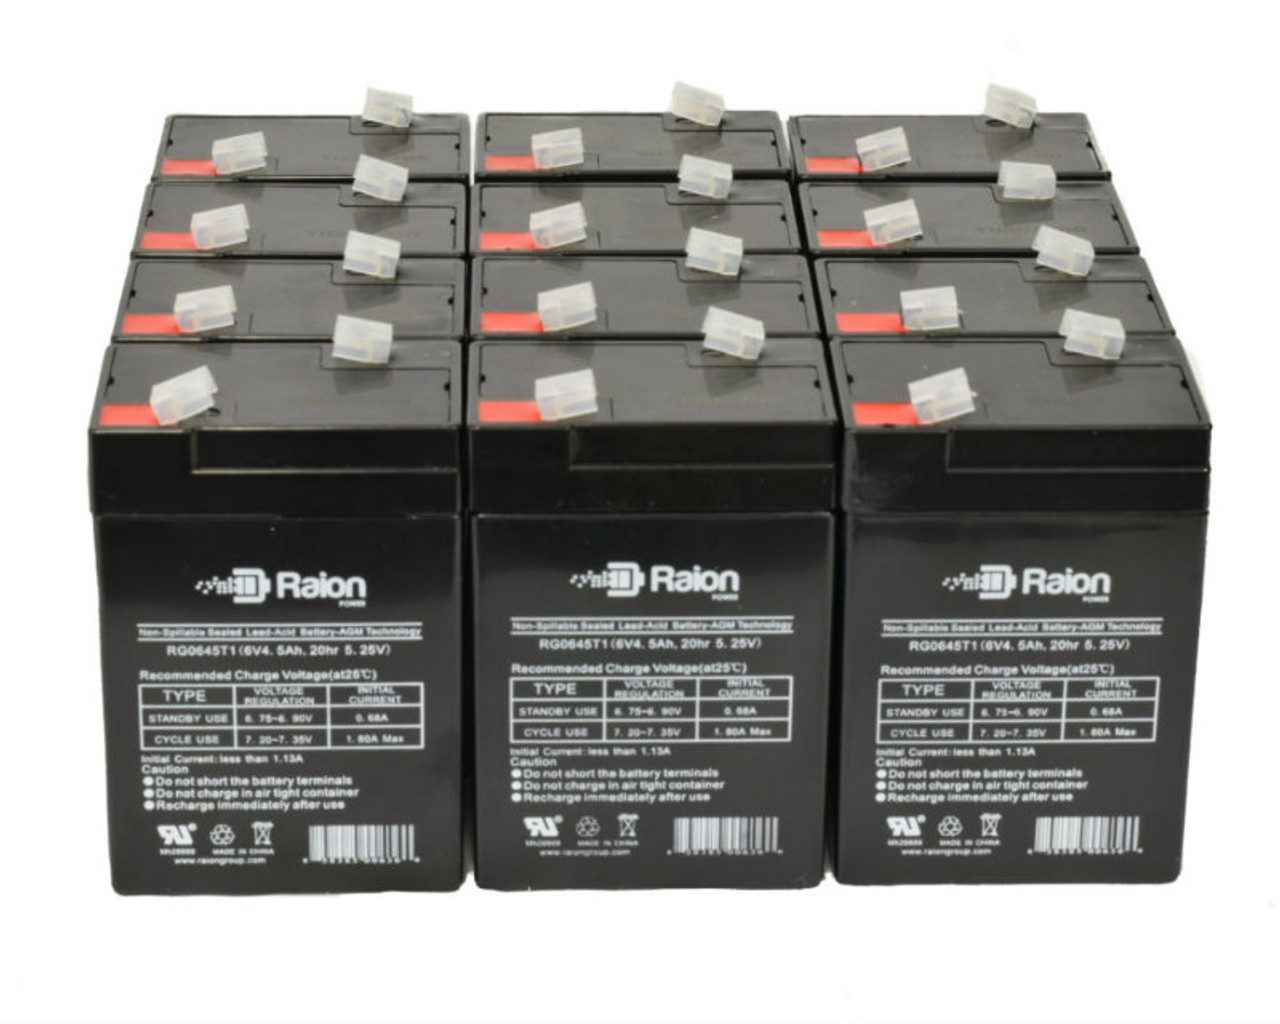 Raion Power 6V 4.5Ah Replacement Emergency Light Battery for Siltron SN640 - 12 Pack